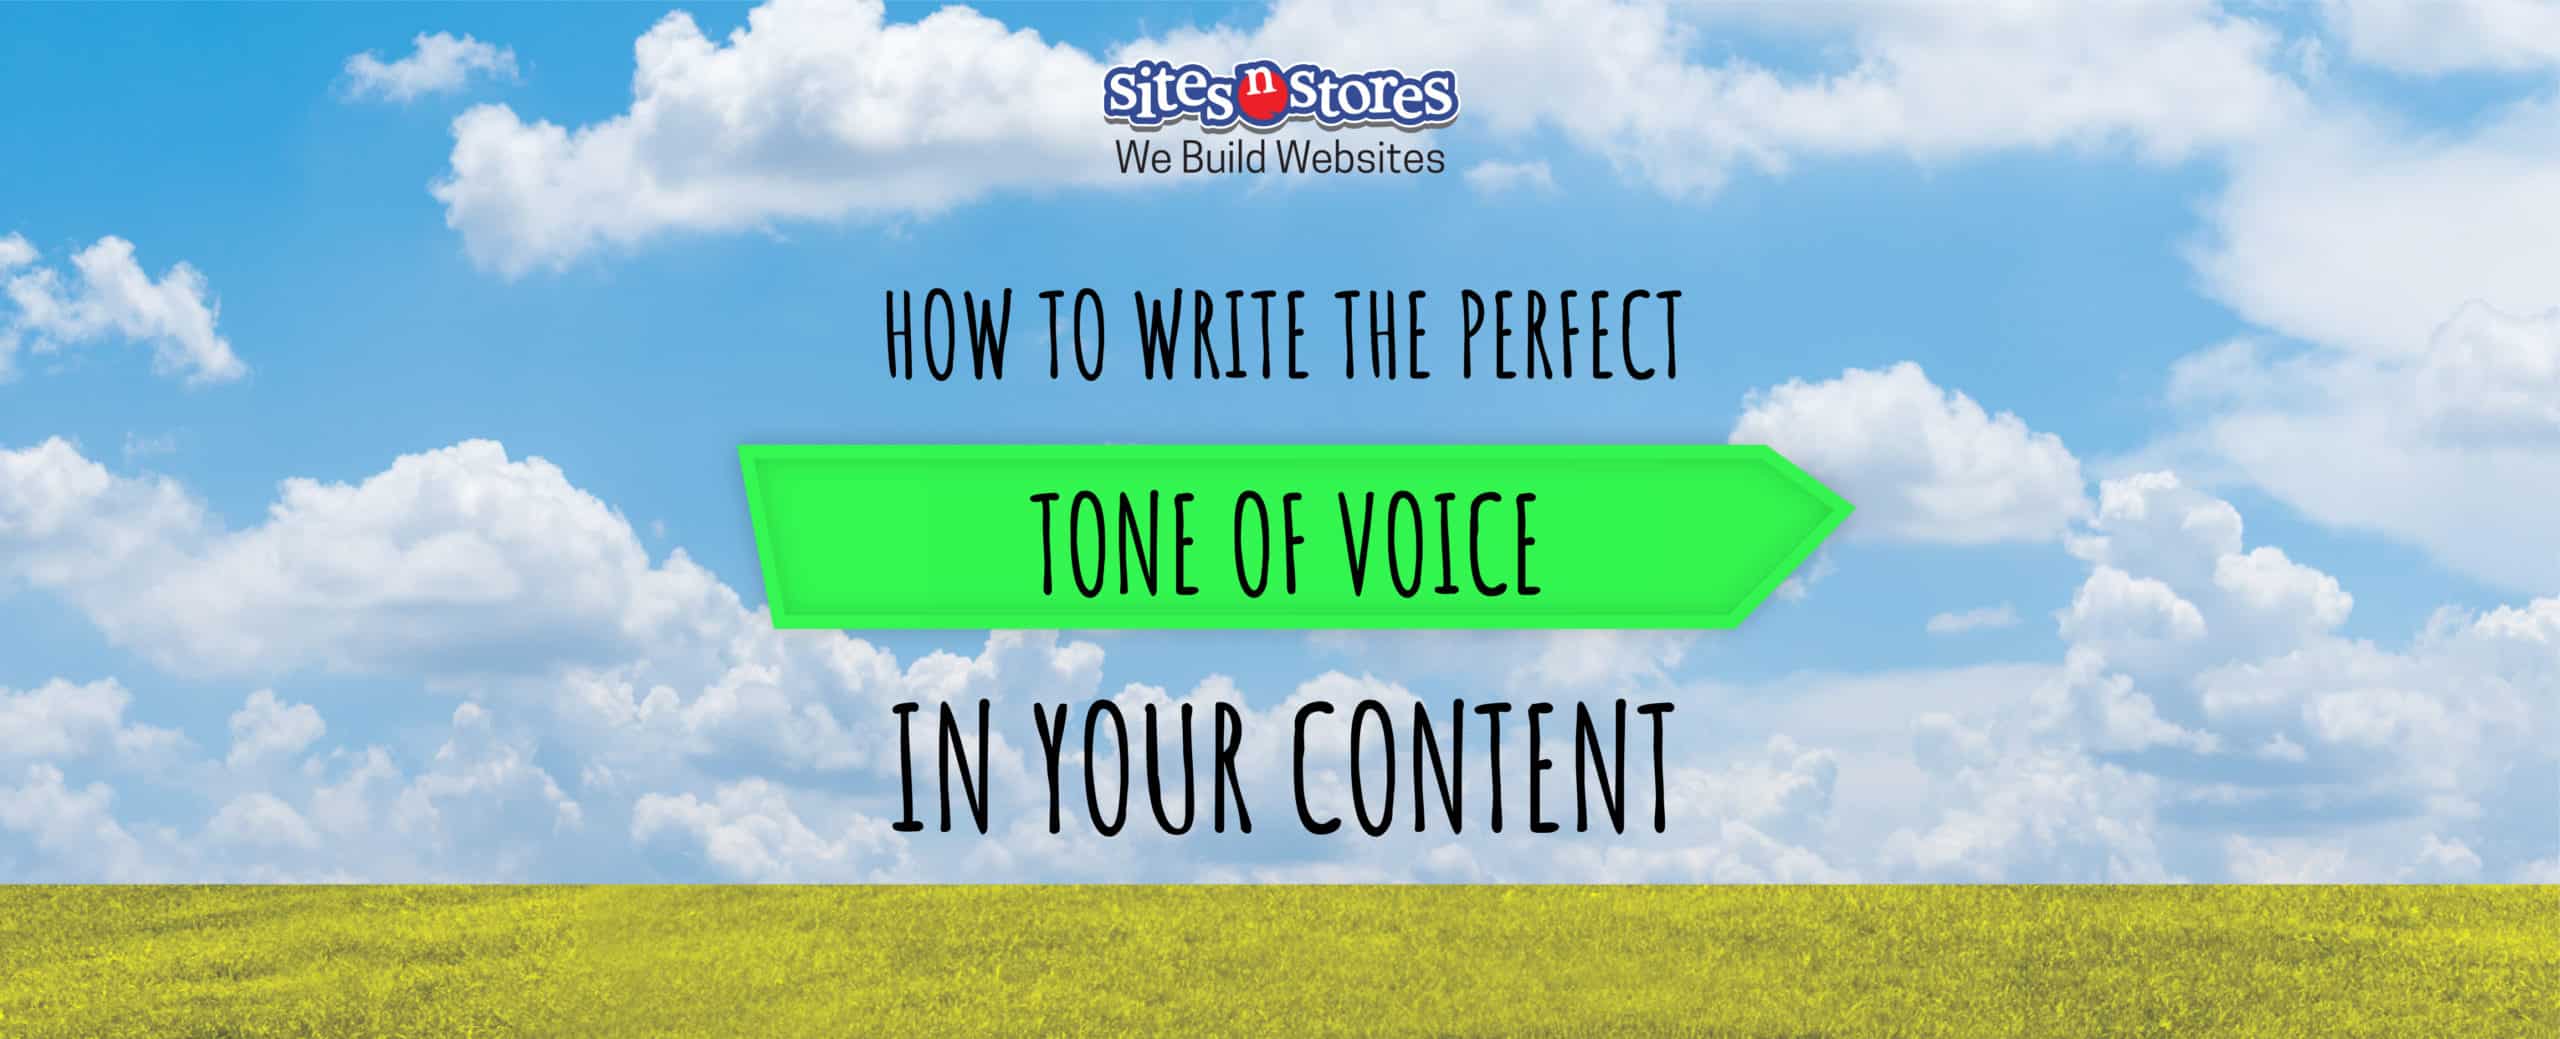 How to Write the Perfect Tone of Voice in Your Content